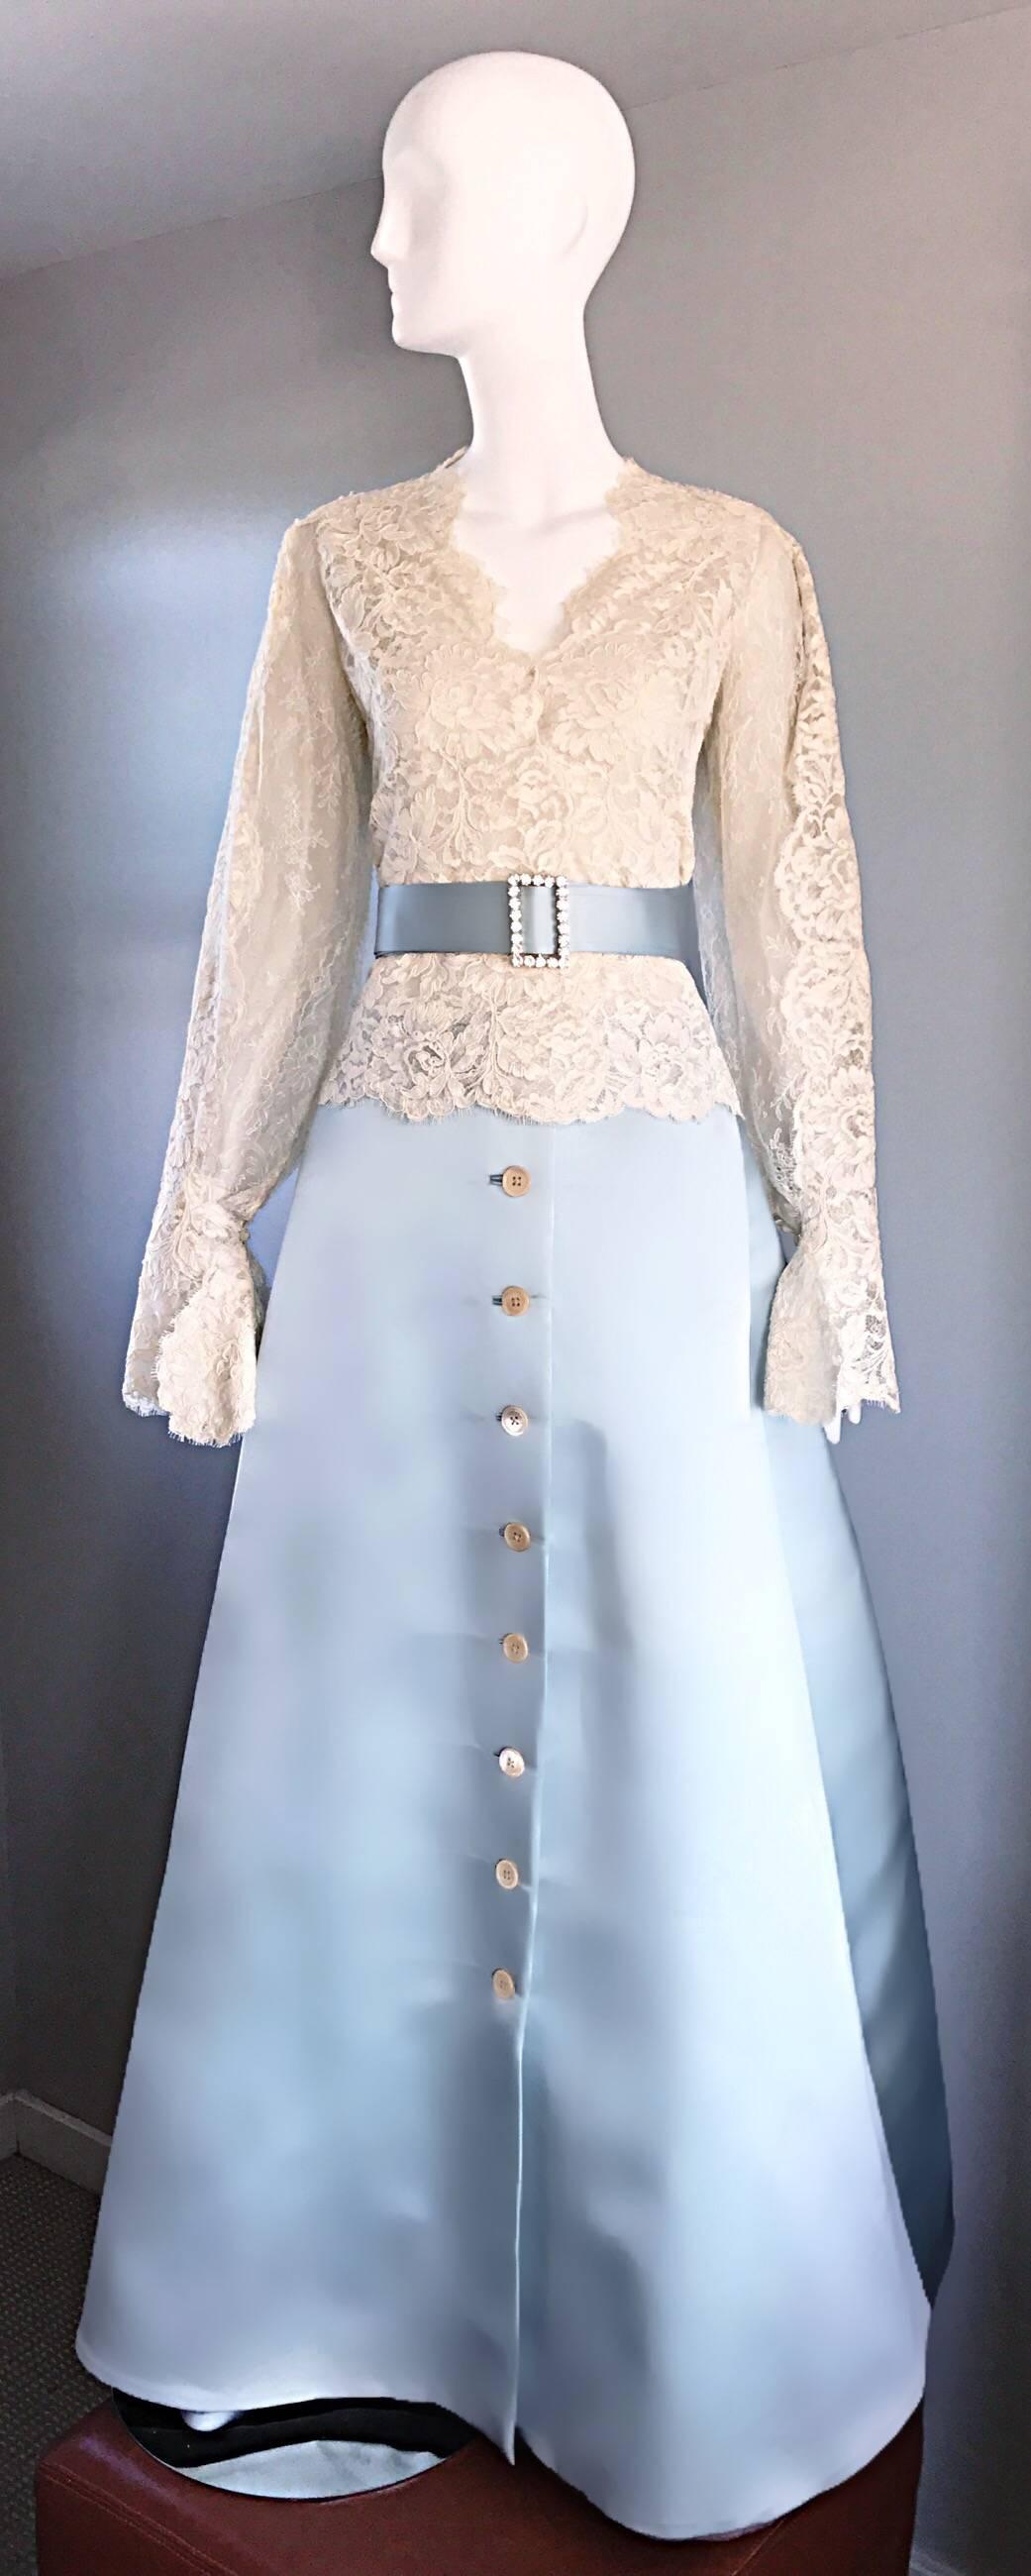 Gray Exquisite Vintage Bill Blass 1970s Baby Blue + White Lace 3 Piece Evening Gown